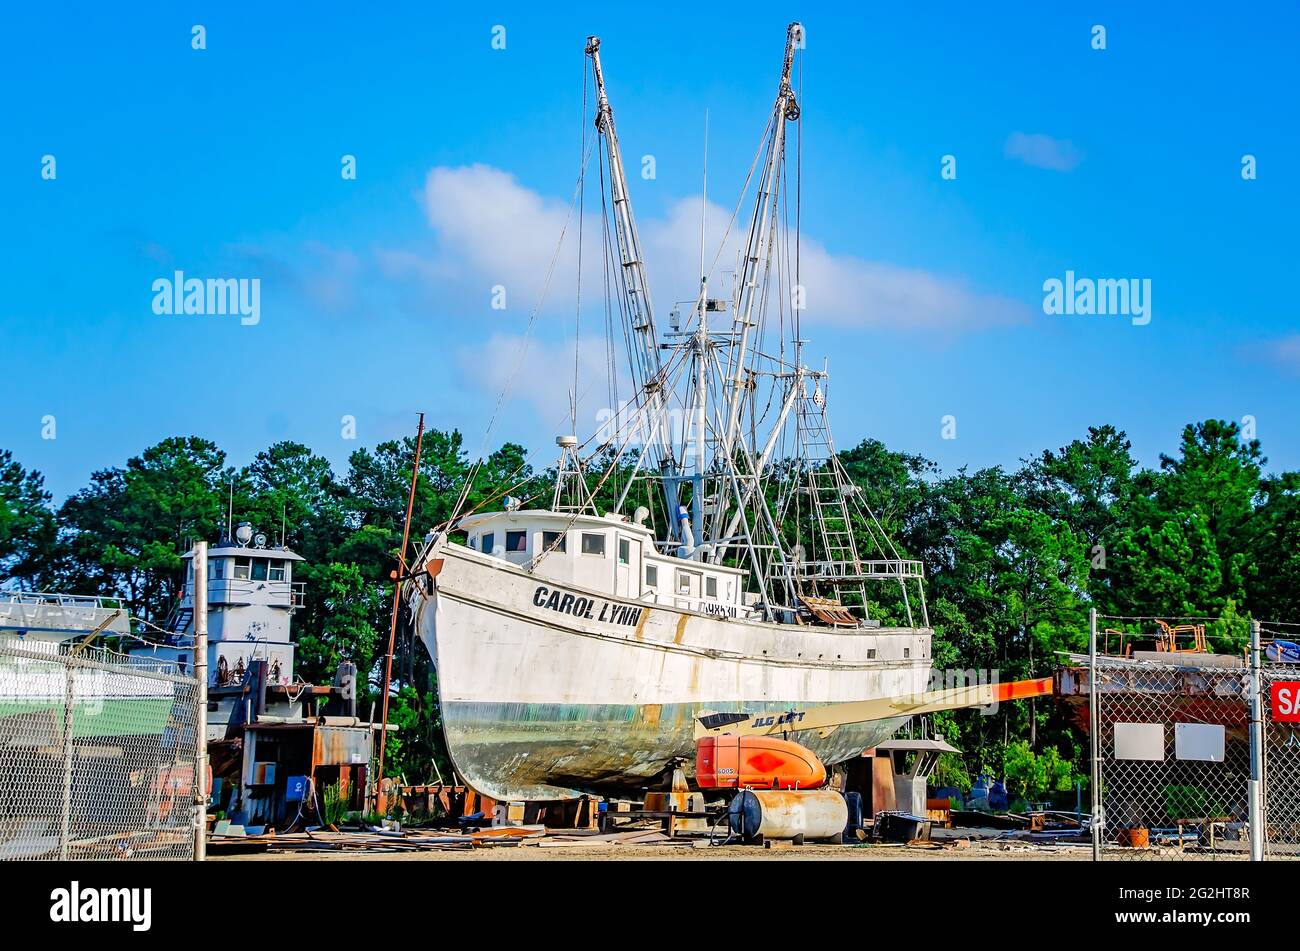 An old wooden shrimp boat sits in dry dock for repair at a local shipyard, June 9, 2021, in Bayou La Batre, Alabama. Stock Photo